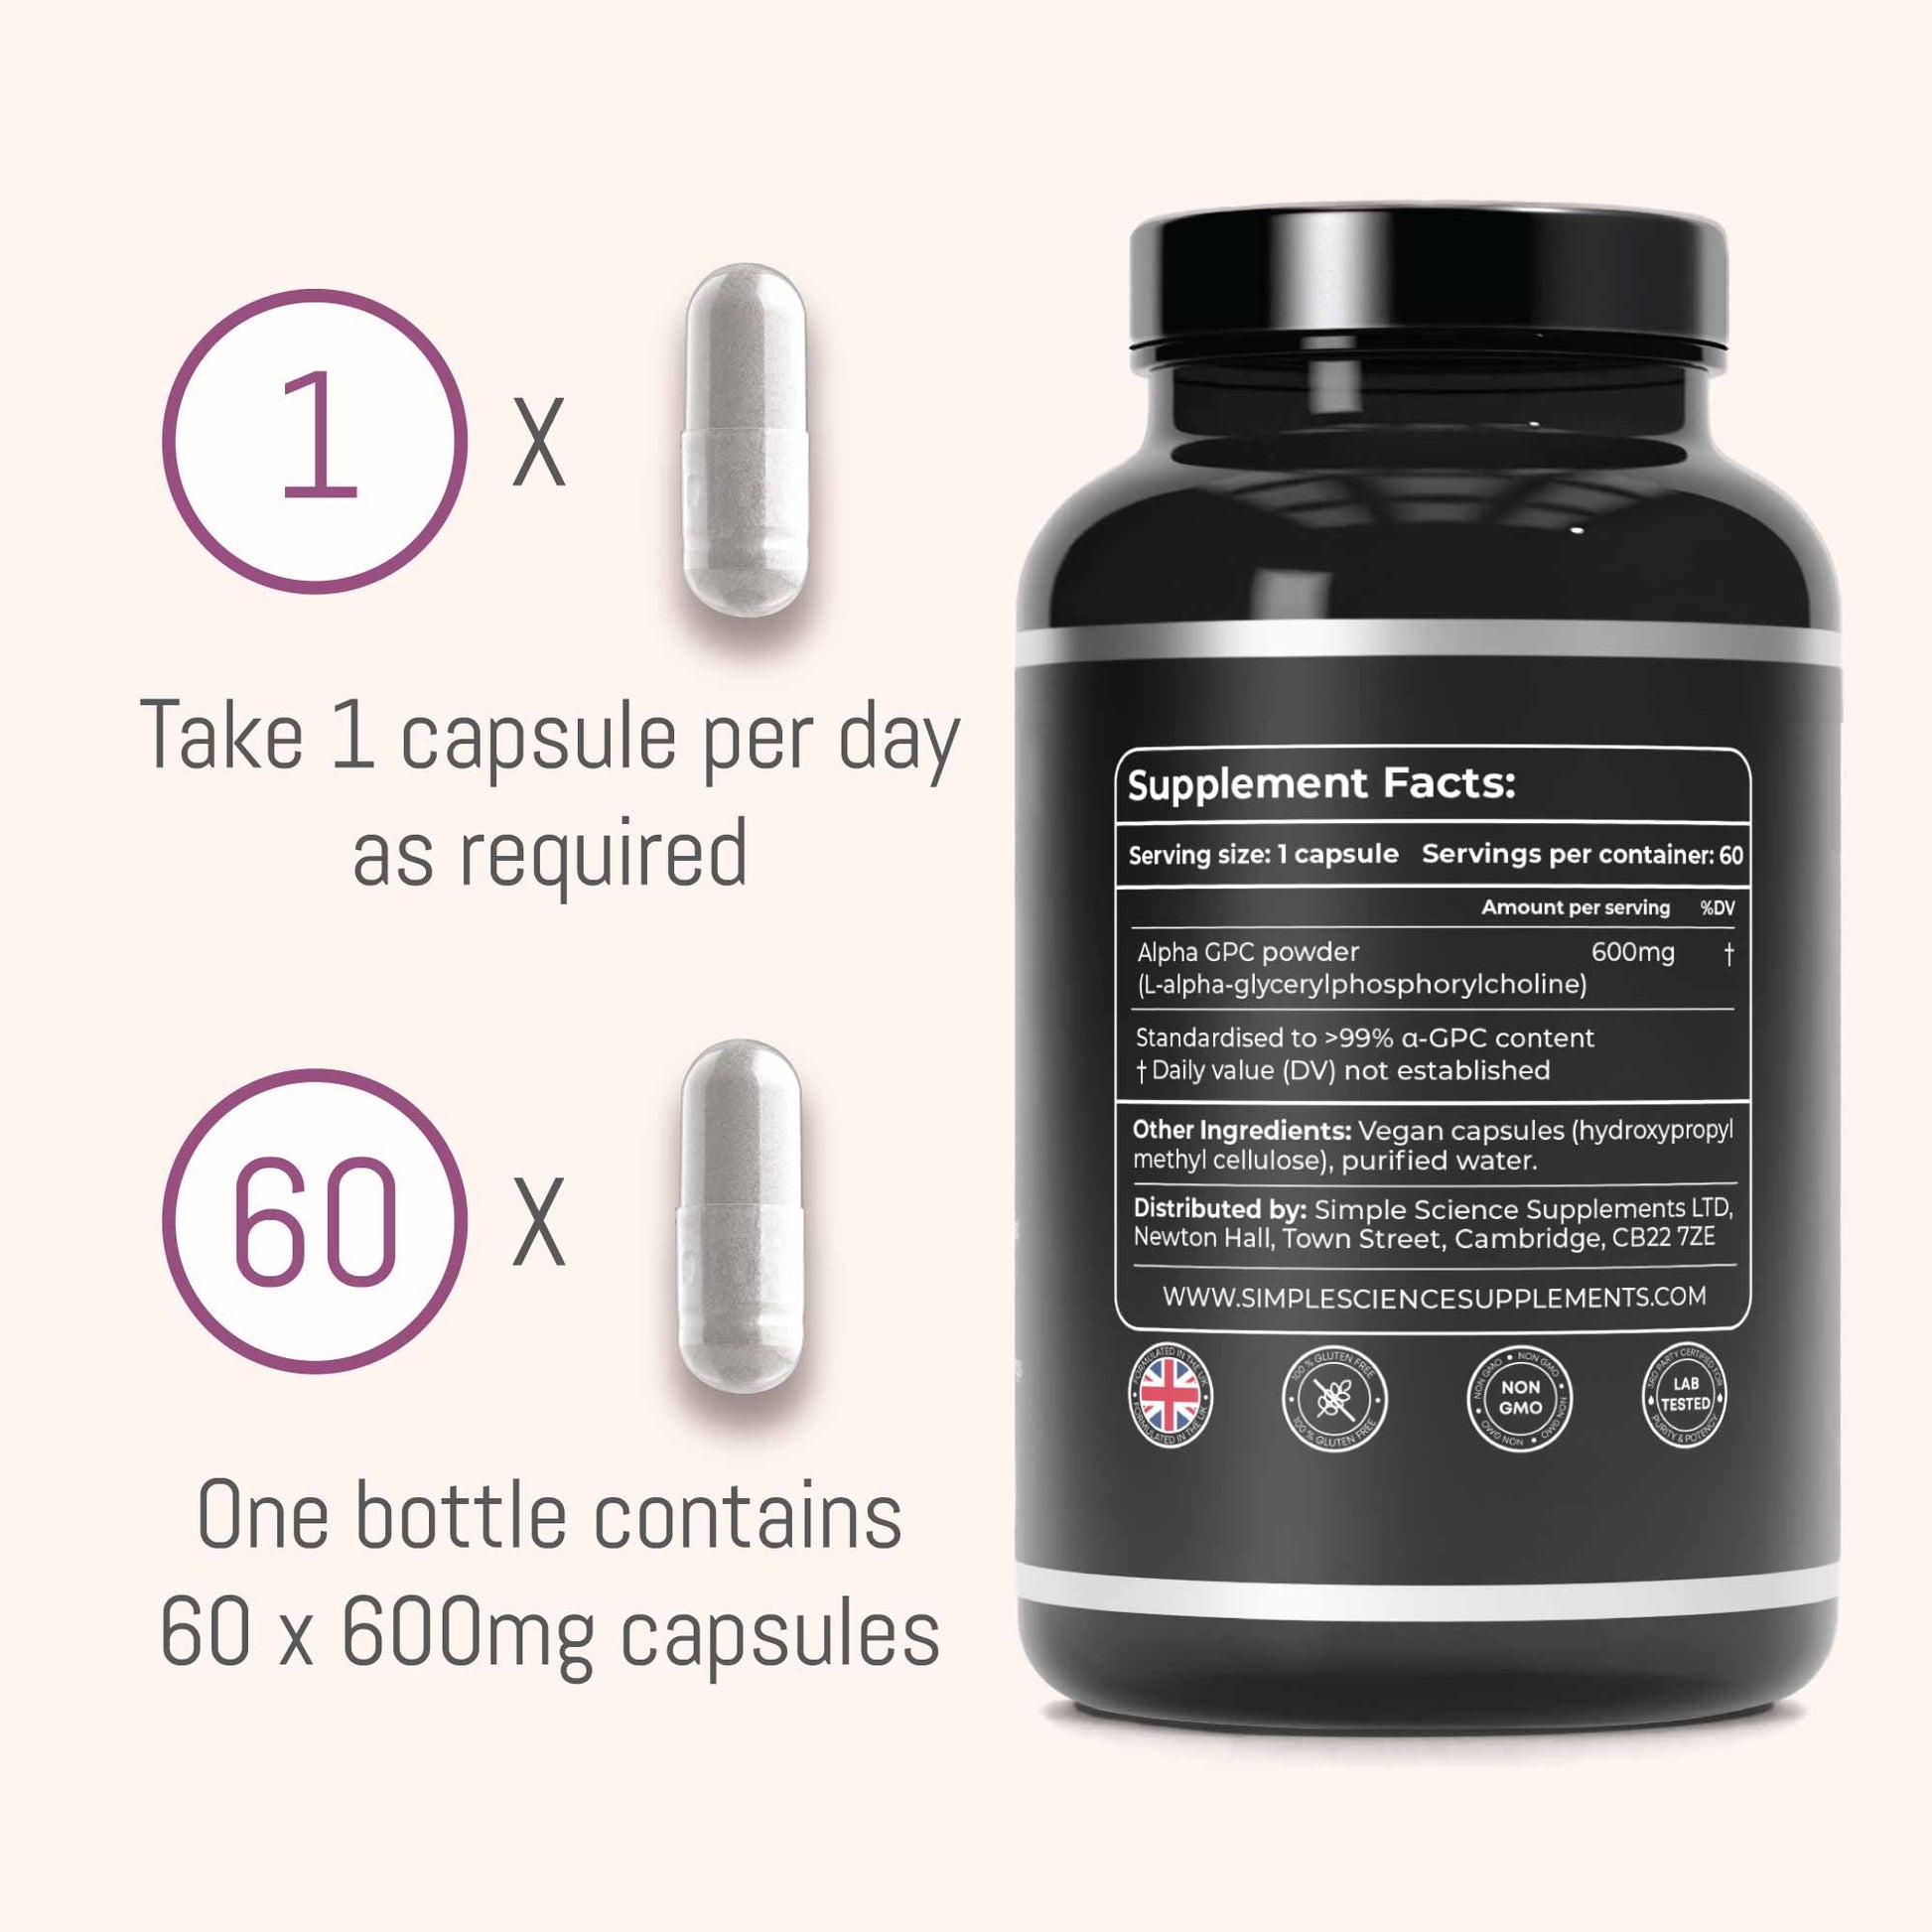 Best Pure 100% Alpha-GPC 600mg bottle supplement lab tested choline nootropic for brain support, focus, memory, mood and energy, best supplement exercise recovery muscle force learning optimal dosage